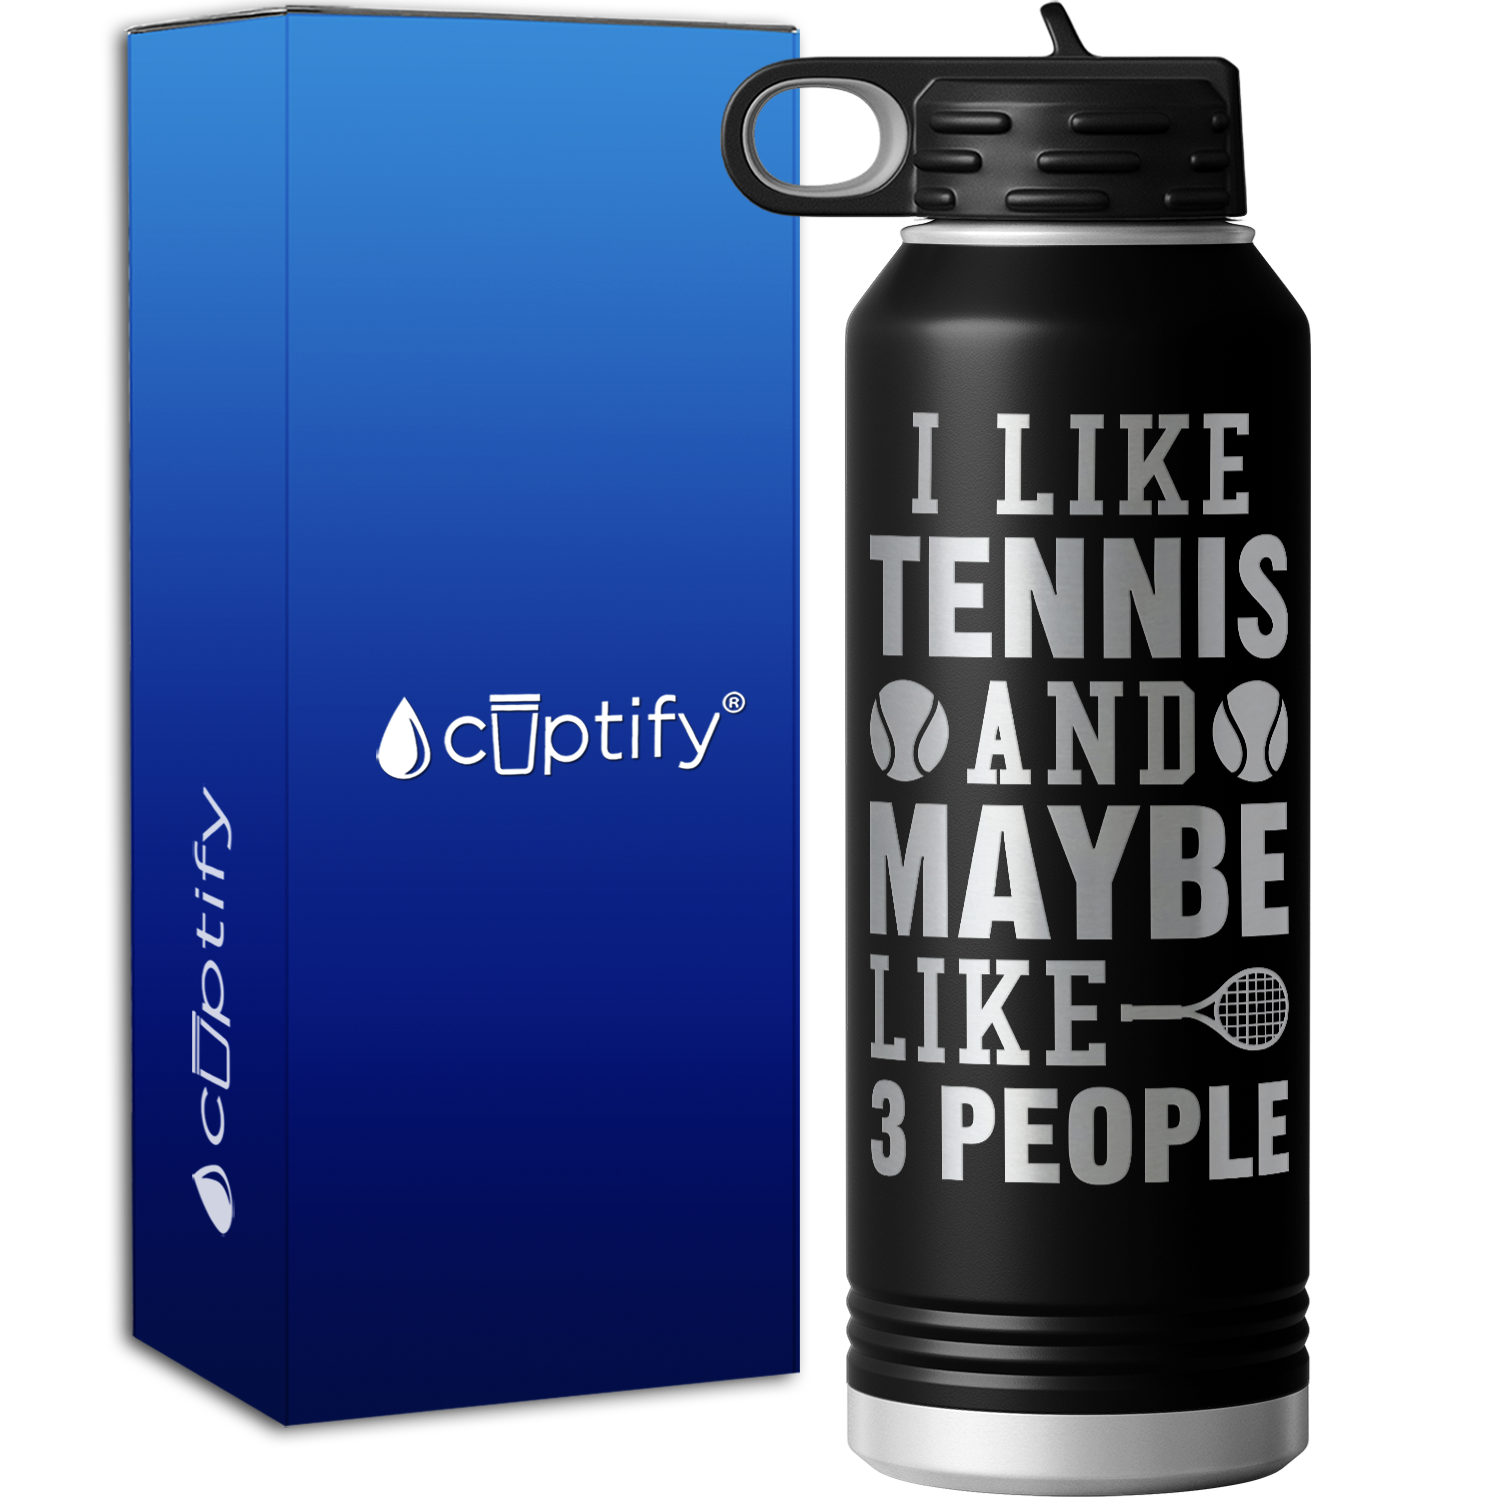 I like Tennis and Maybe LIke 3 People 40oz Sport Water Bottle